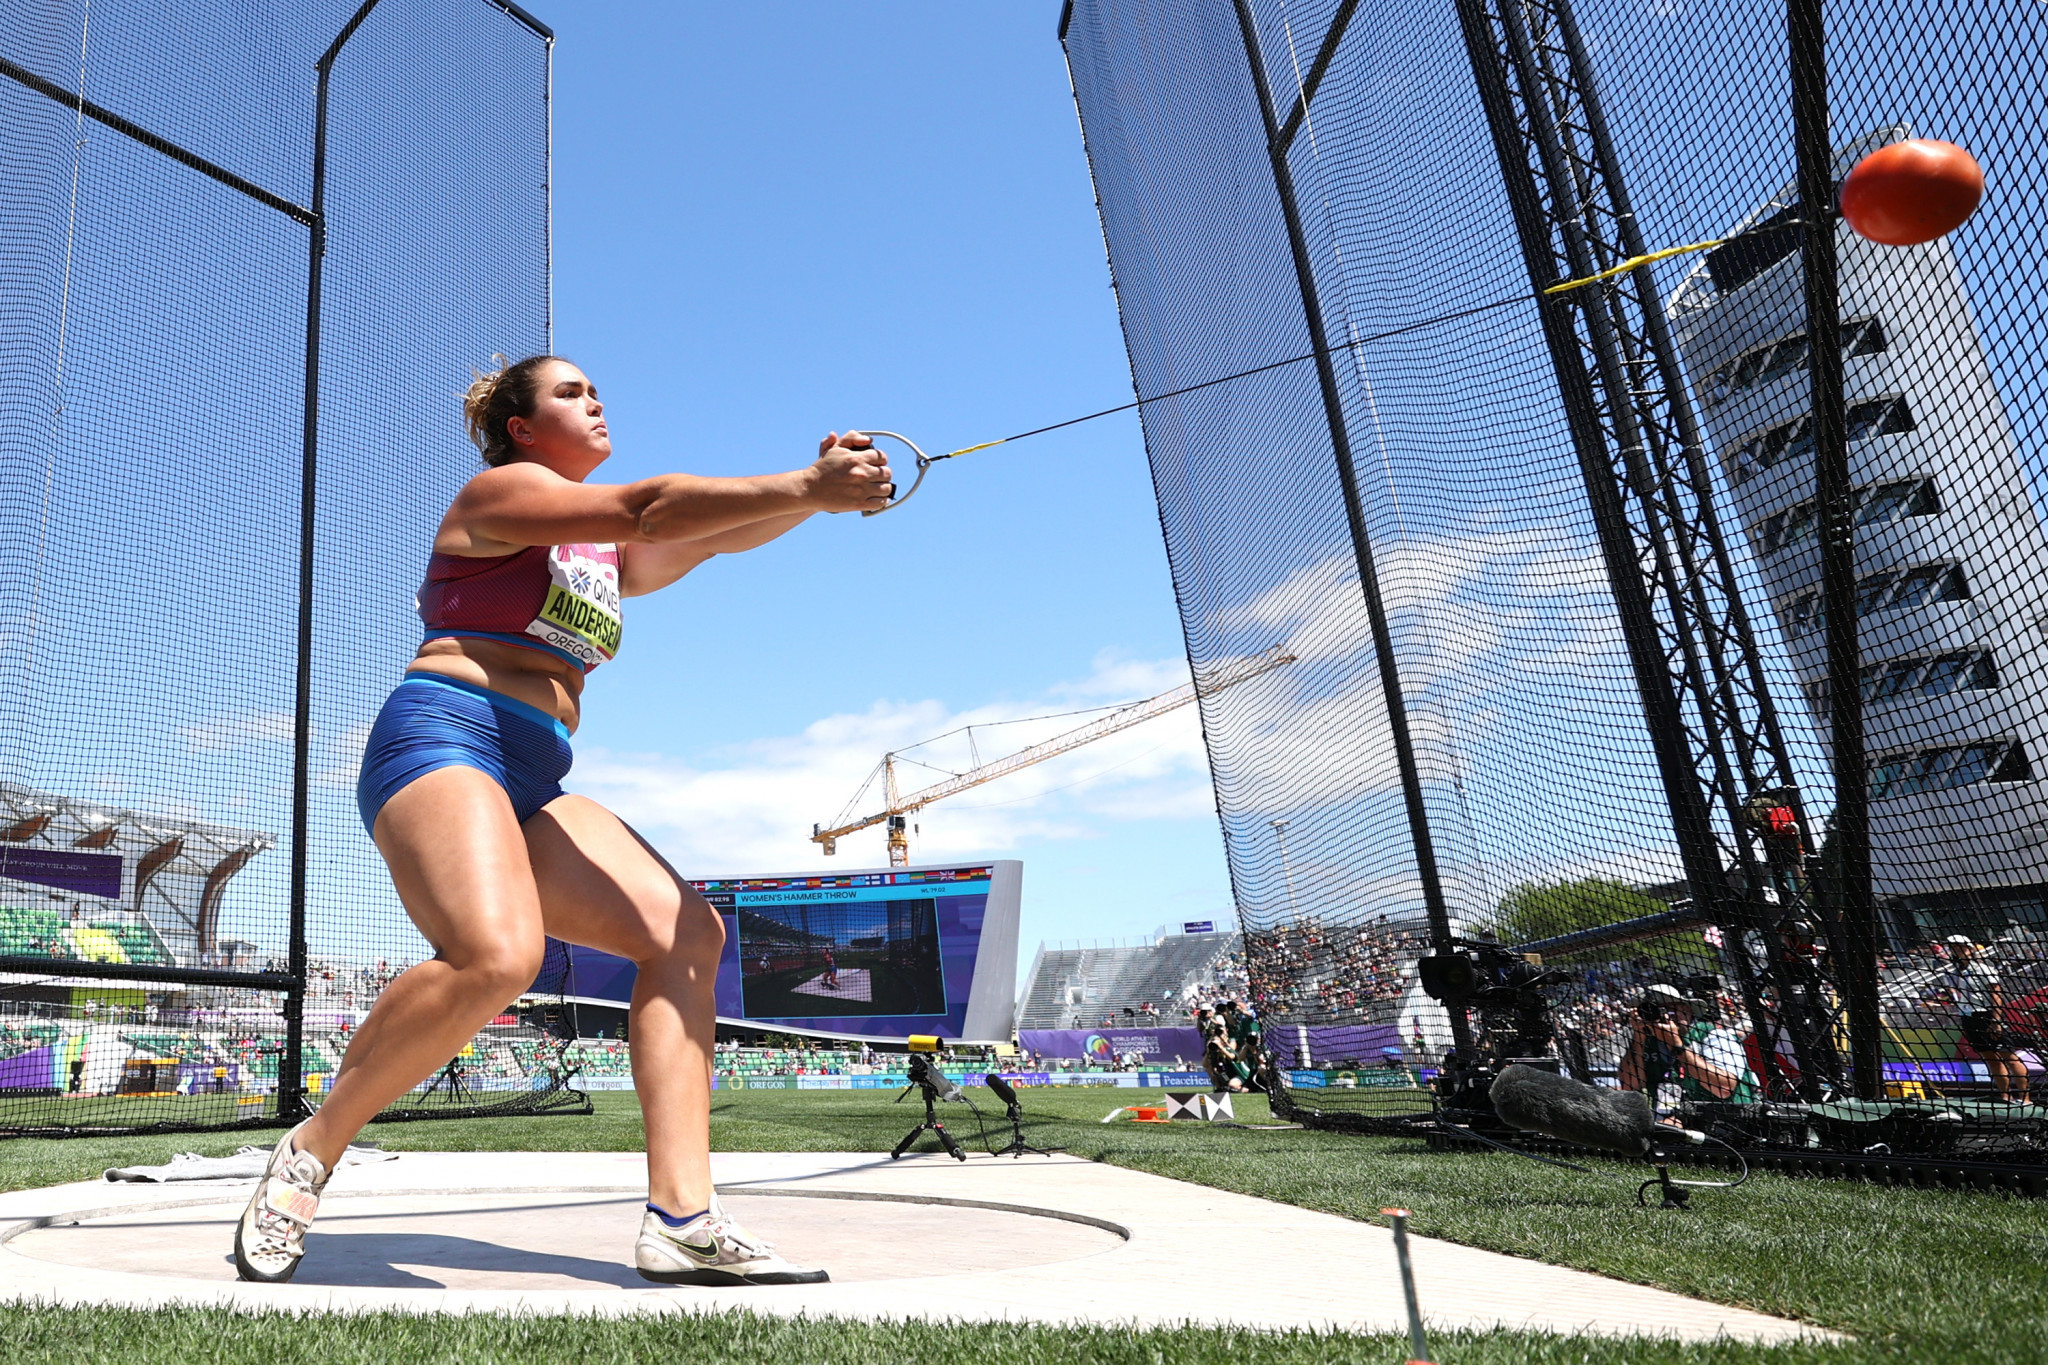 United States dominate women's hammer throw at World Athletics Championships in Oregon